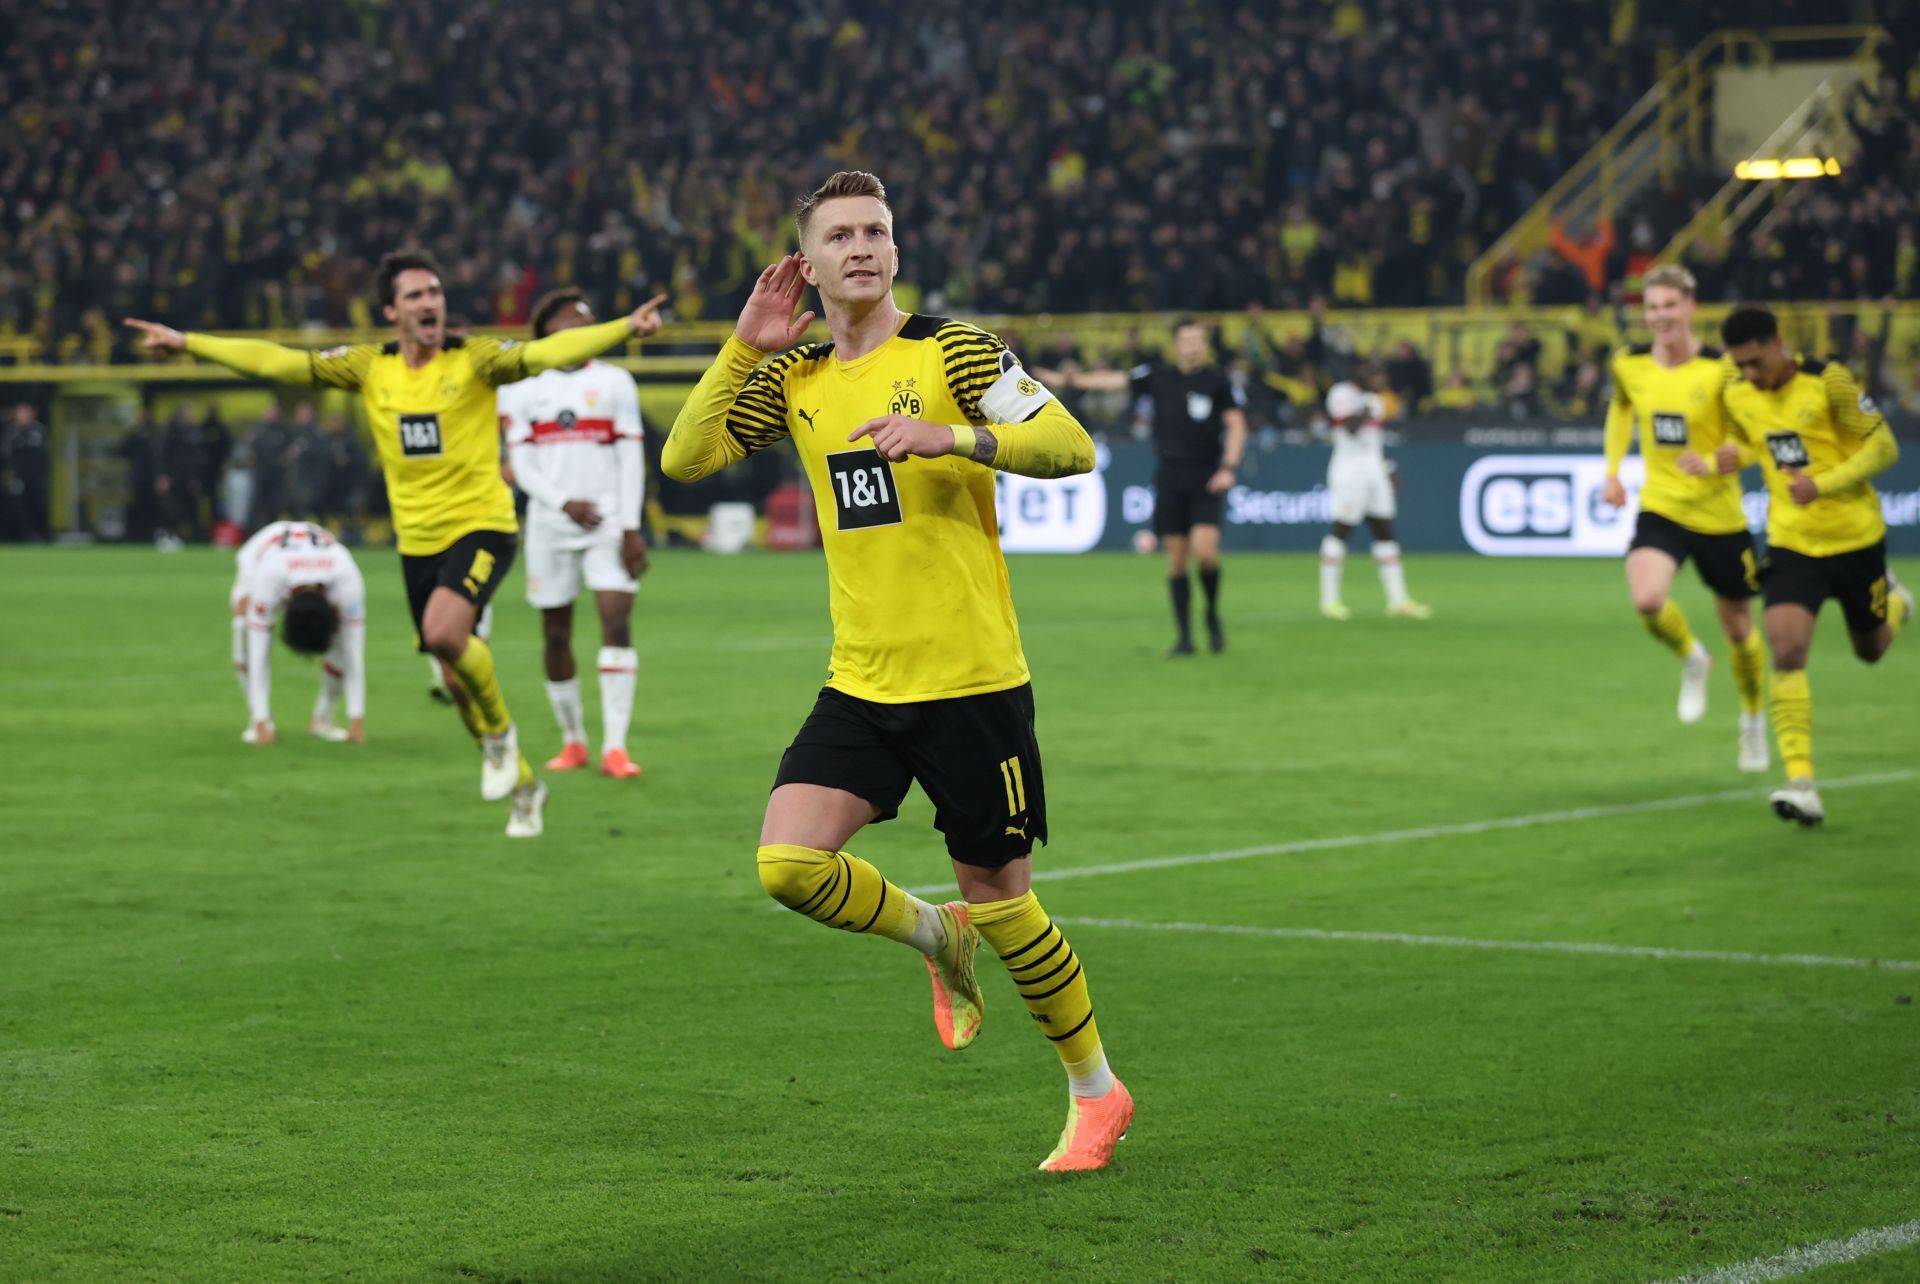 Borussia Dortmund are in danger of missing the Champions League knockouts.